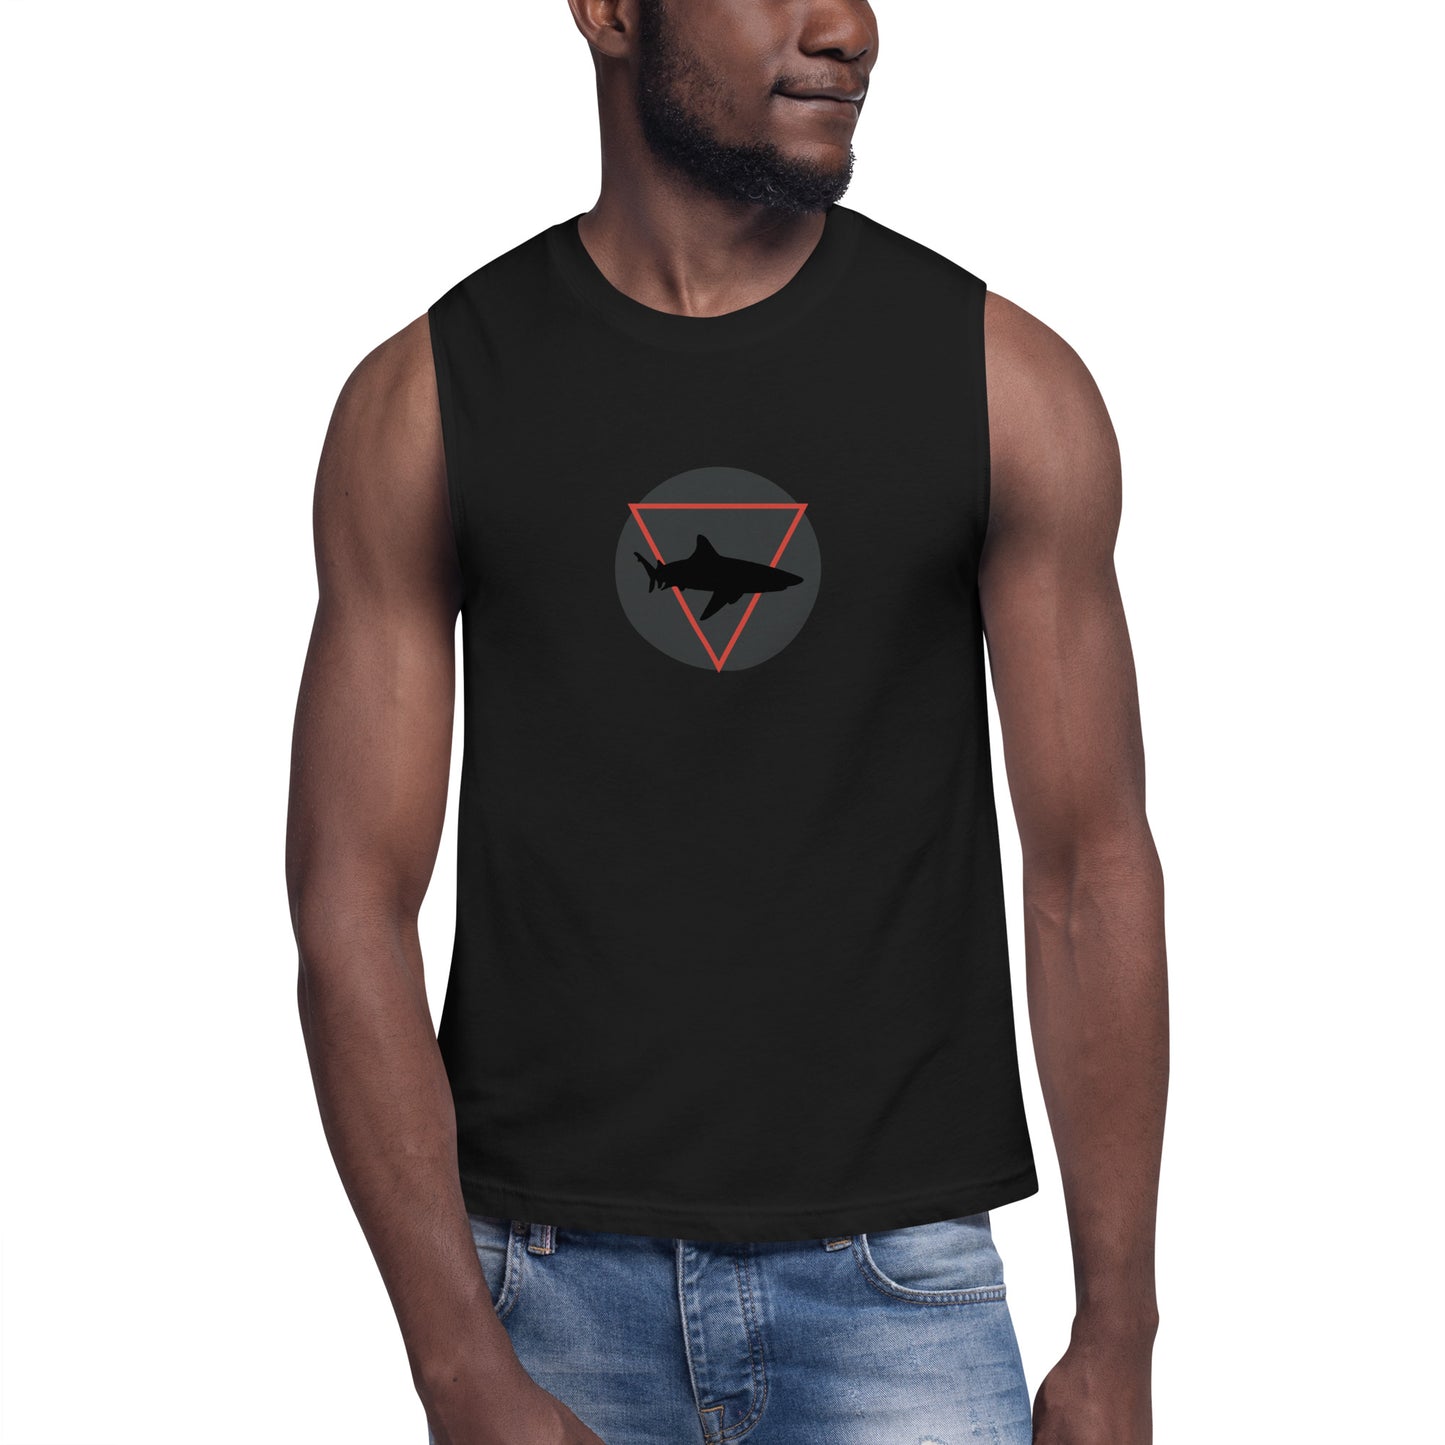 DREAM CHASER Muscle Shirt